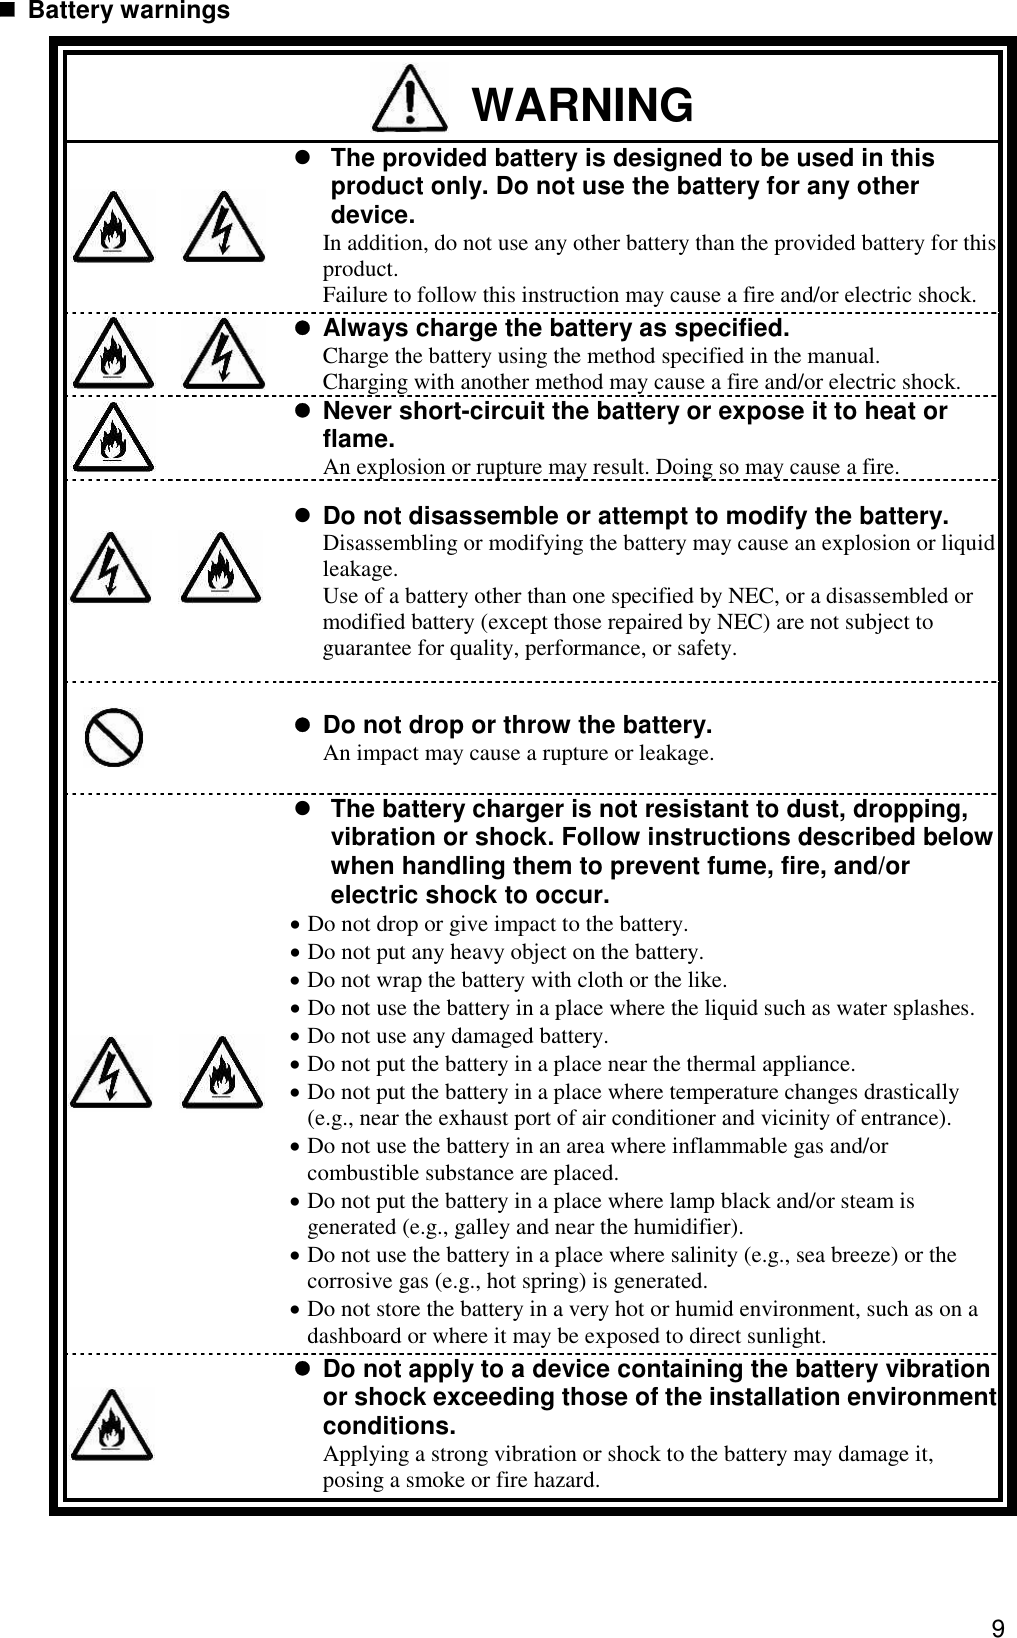 9  Battery warnings  WARNING    The provided battery is designed to be used in this product only. Do not use the battery for any other device. In addition, do not use any other battery than the provided battery for this product. Failure to follow this instruction may cause a fire and/or electric shock.    Always charge the battery as specified. Charge the battery using the method specified in the manual. Charging with another method may cause a fire and/or electric shock.      Never short-circuit the battery or expose it to heat or flame. An explosion or rupture may result. Doing so may cause a fire.        Do not disassemble or attempt to modify the battery.   Disassembling or modifying the battery may cause an explosion or liquid leakage.   Use of a battery other than one specified by NEC, or a disassembled or modified battery (except those repaired by NEC) are not subject to guarantee for quality, performance, or safety.      Do not drop or throw the battery. An impact may cause a rupture or leakage.                  The battery charger is not resistant to dust, dropping, vibration or shock. Follow instructions described below when handling them to prevent fume, fire, and/or electric shock to occur.  Do not drop or give impact to the battery.  Do not put any heavy object on the battery.  Do not wrap the battery with cloth or the like.  Do not use the battery in a place where the liquid such as water splashes.  Do not use any damaged battery.  Do not put the battery in a place near the thermal appliance.  Do not put the battery in a place where temperature changes drastically (e.g., near the exhaust port of air conditioner and vicinity of entrance).  Do not use the battery in an area where inflammable gas and/or combustible substance are placed.  Do not put the battery in a place where lamp black and/or steam is generated (e.g., galley and near the humidifier).  Do not use the battery in a place where salinity (e.g., sea breeze) or the corrosive gas (e.g., hot spring) is generated.  Do not store the battery in a very hot or humid environment, such as on a dashboard or where it may be exposed to direct sunlight.   Do not apply to a device containing the battery vibration or shock exceeding those of the installation environment conditions. Applying a strong vibration or shock to the battery may damage it, posing a smoke or fire hazard.   